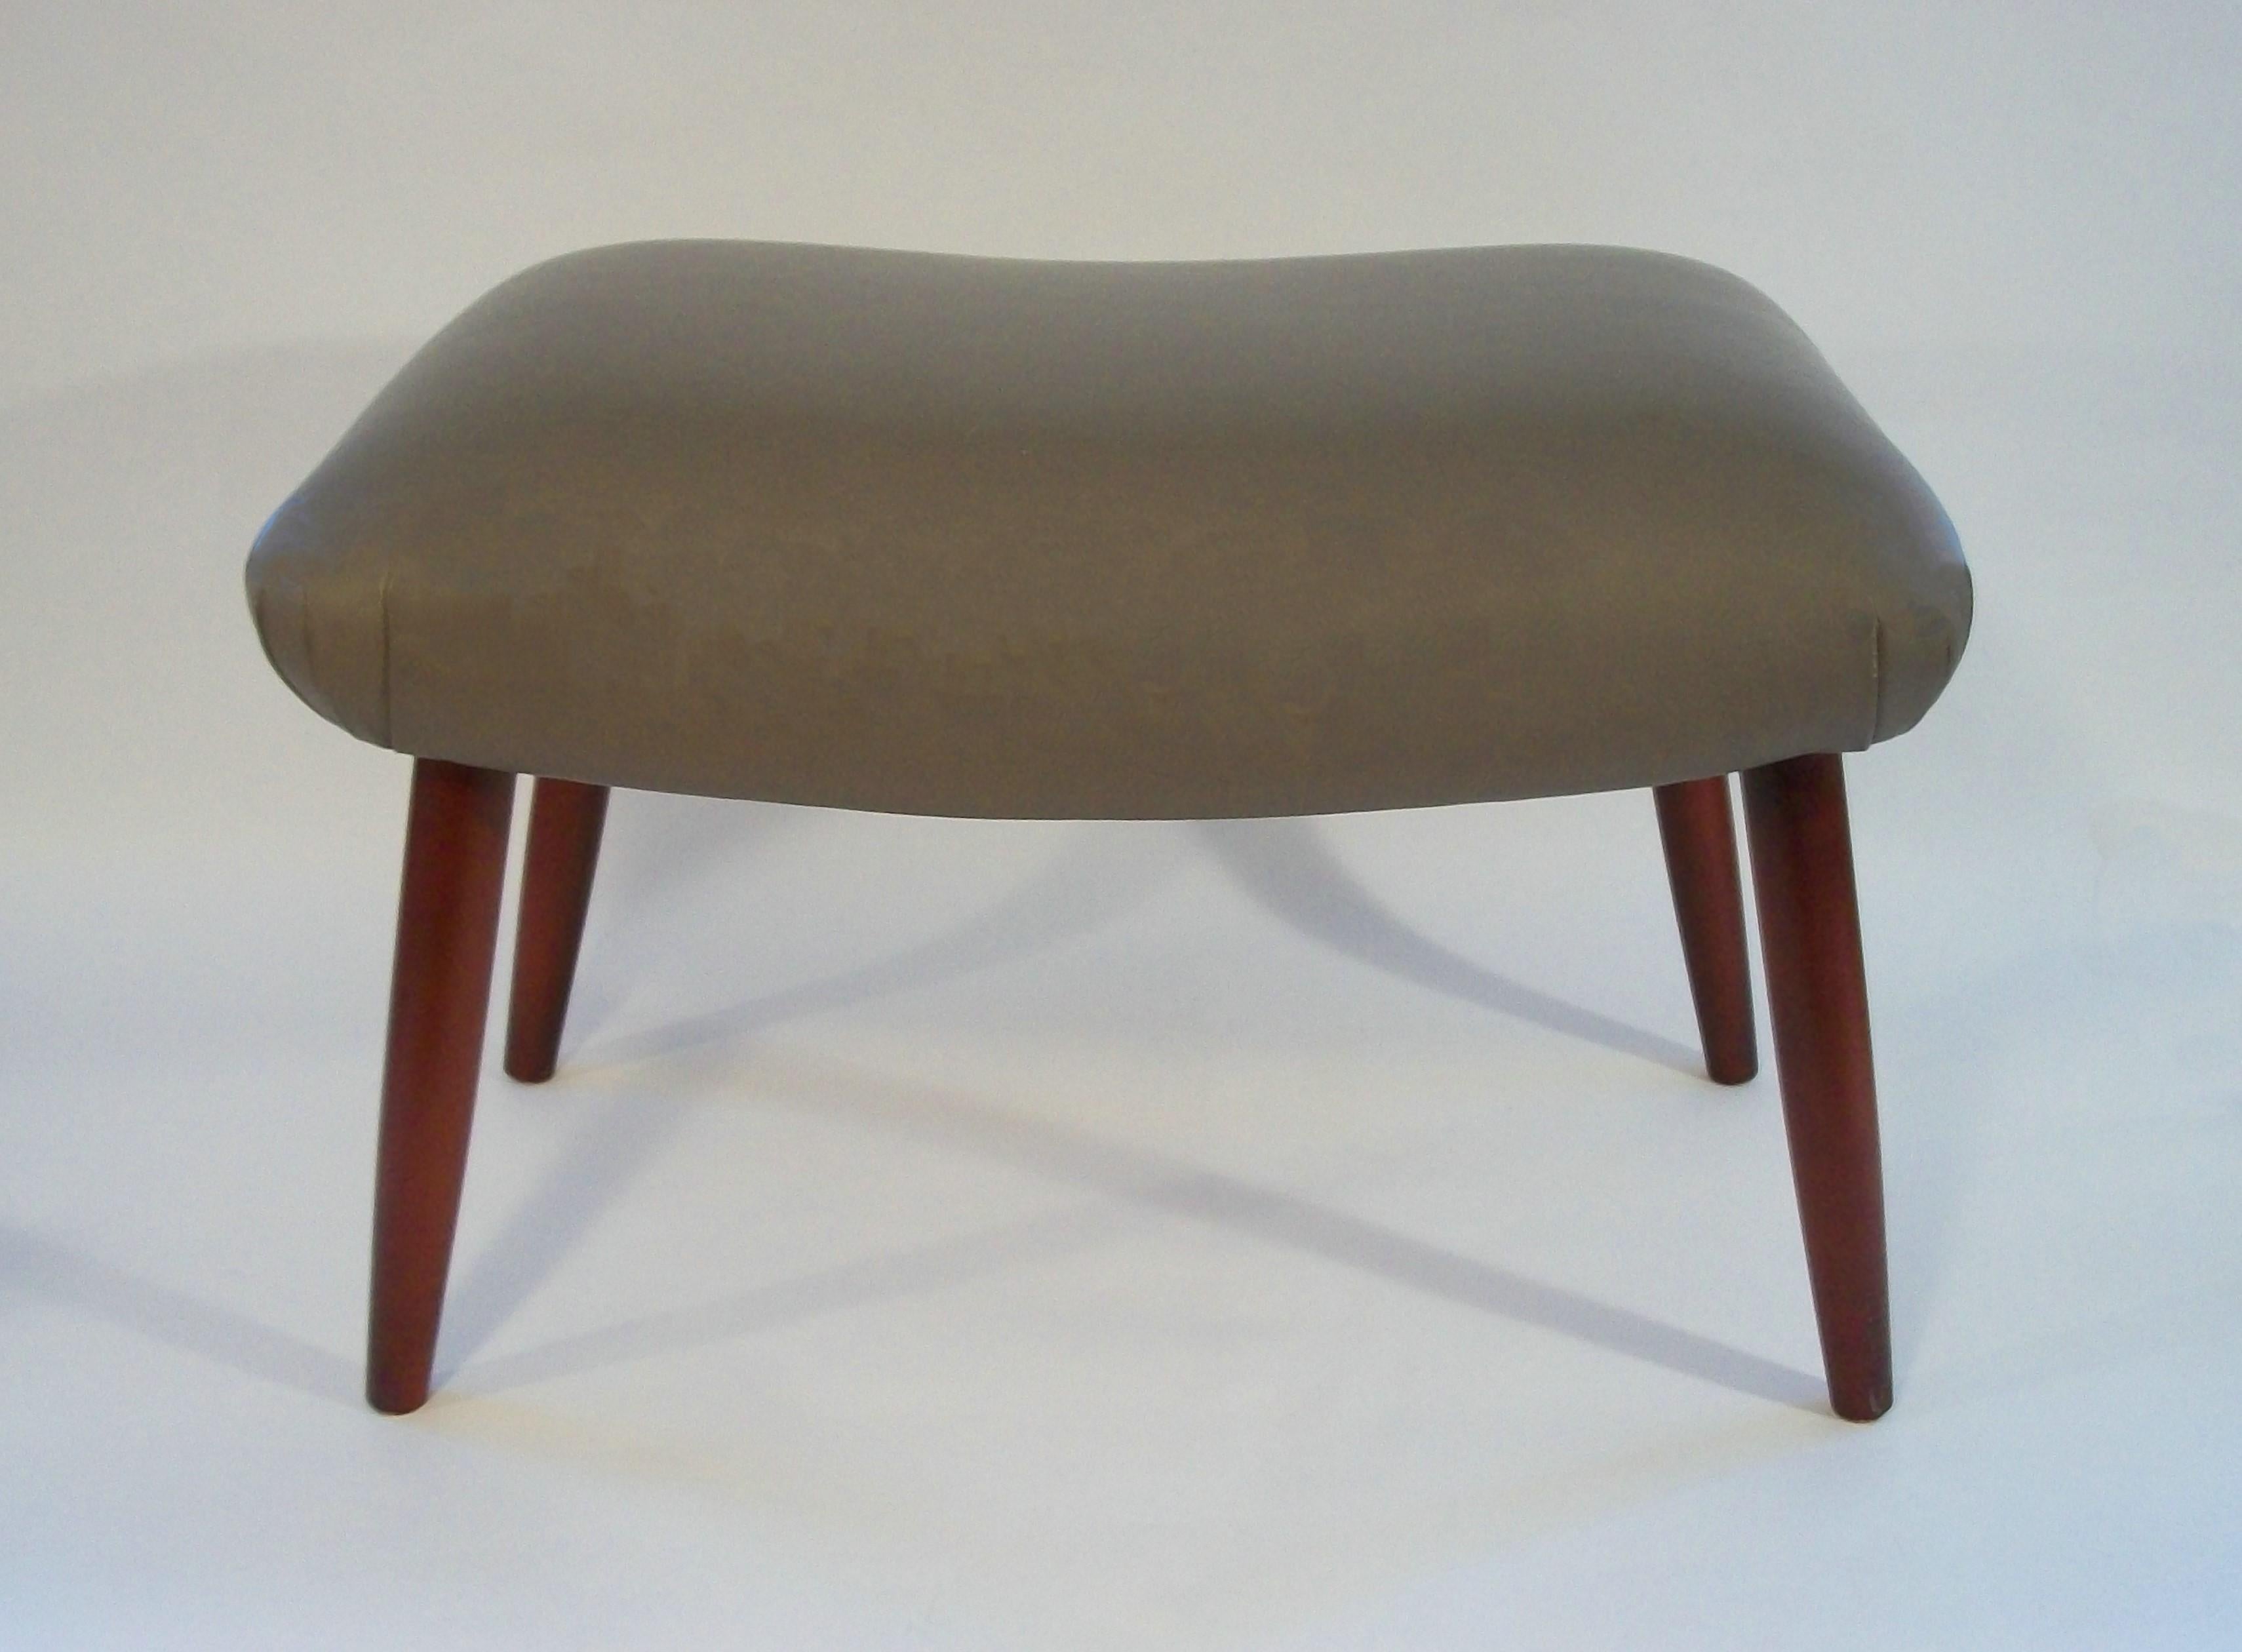 Mid-Century Modern Mid Century Saddle Seat Foot Stool / Ottoman - Leather Upholstery - Circa 1980's For Sale